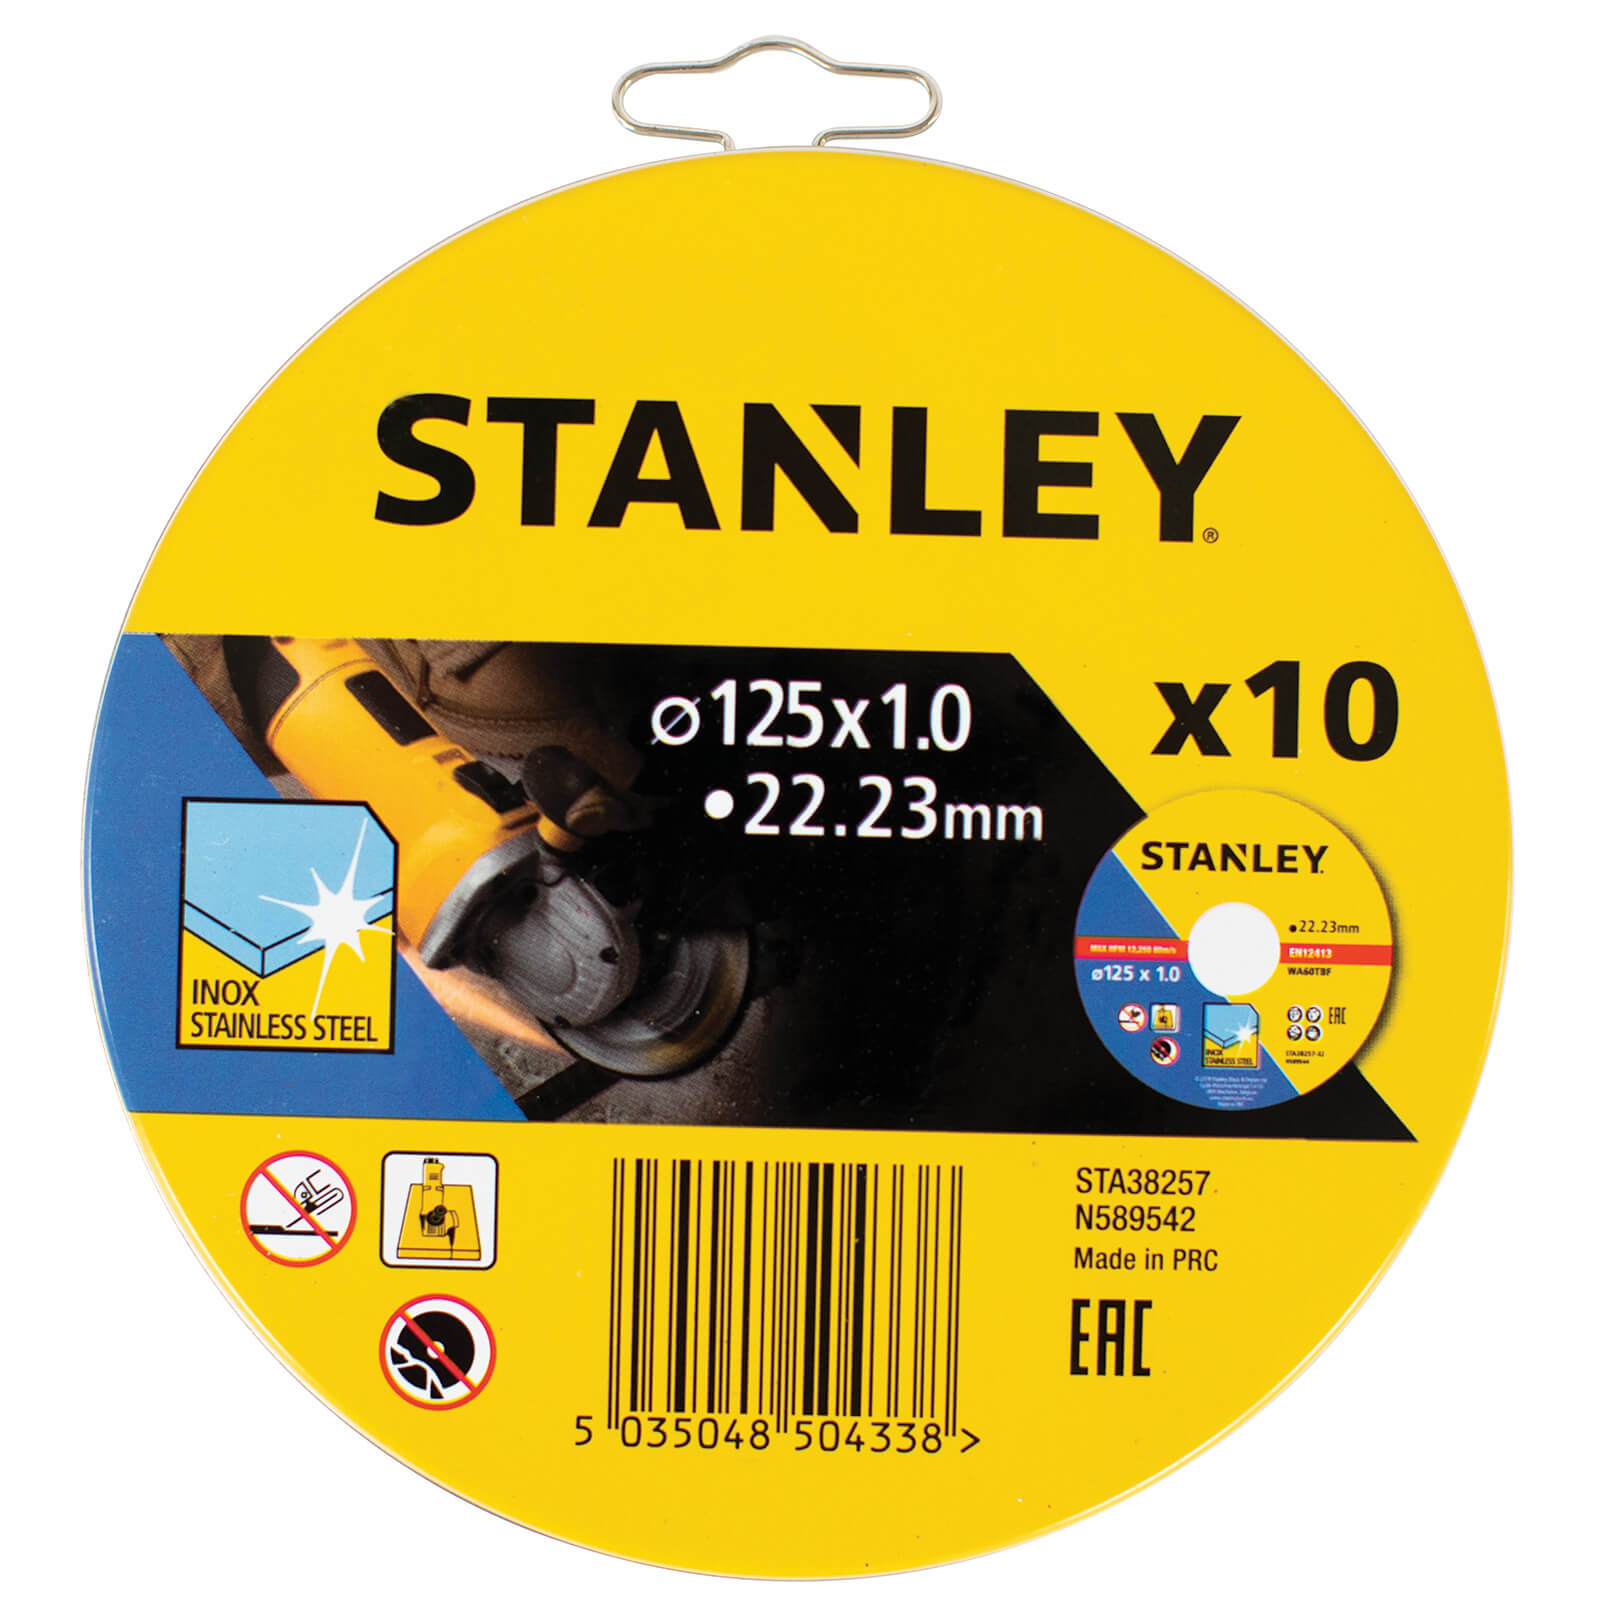 Photo of Stanley 10x Cutting Discs - 125 X 1mm